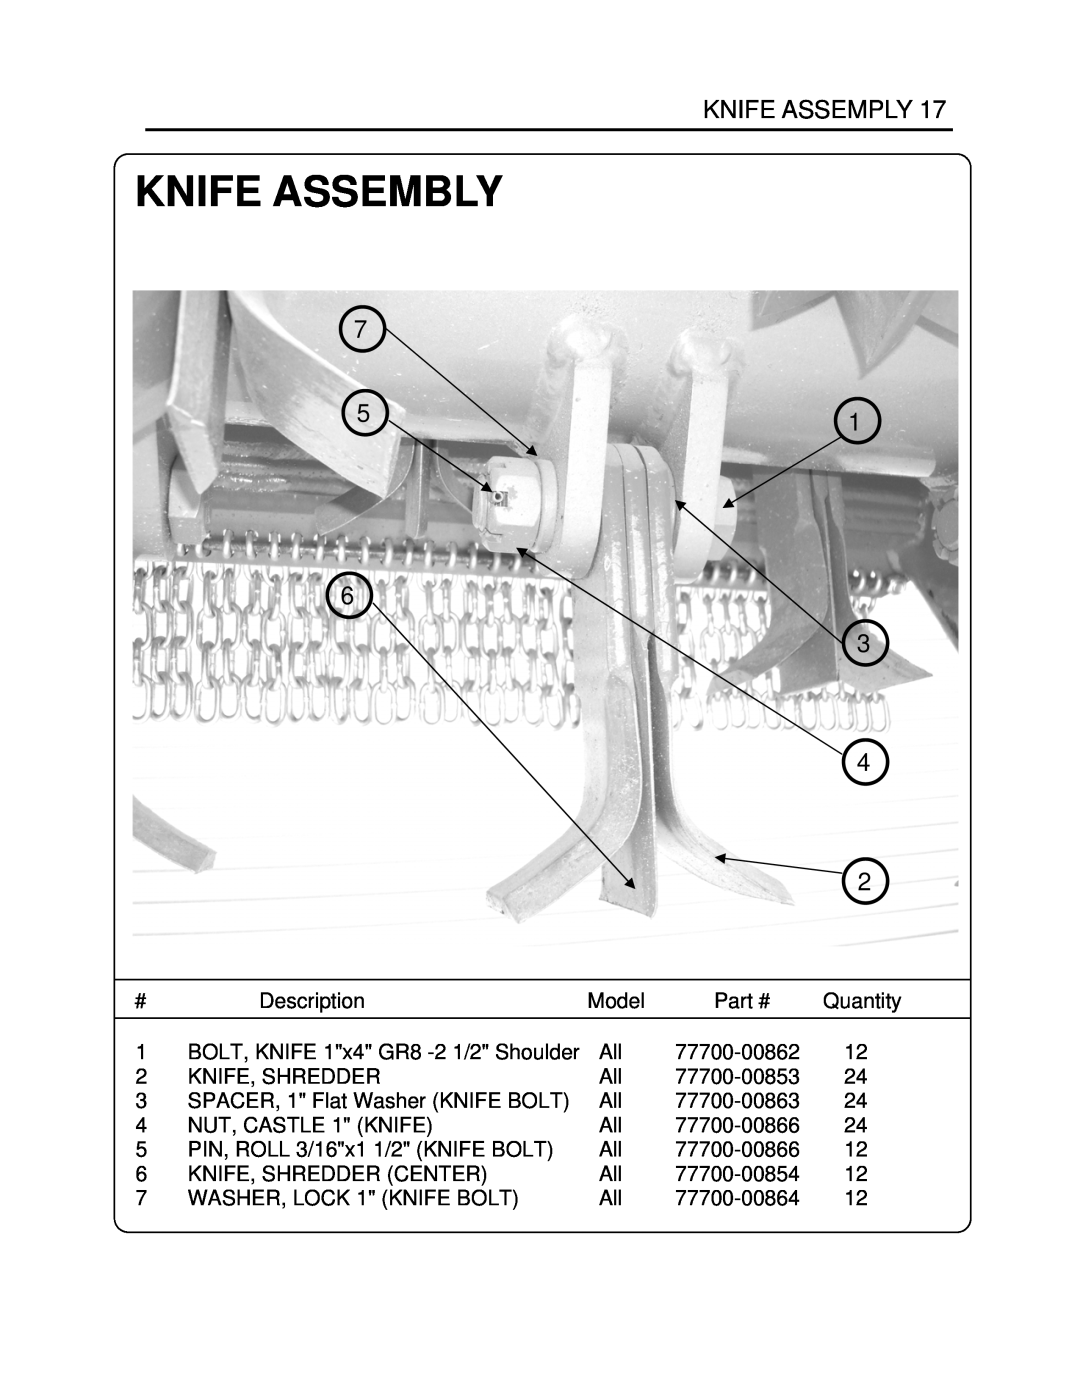 Generac Power Systems K4080 manual Knife Assembly, Knife Assemply 